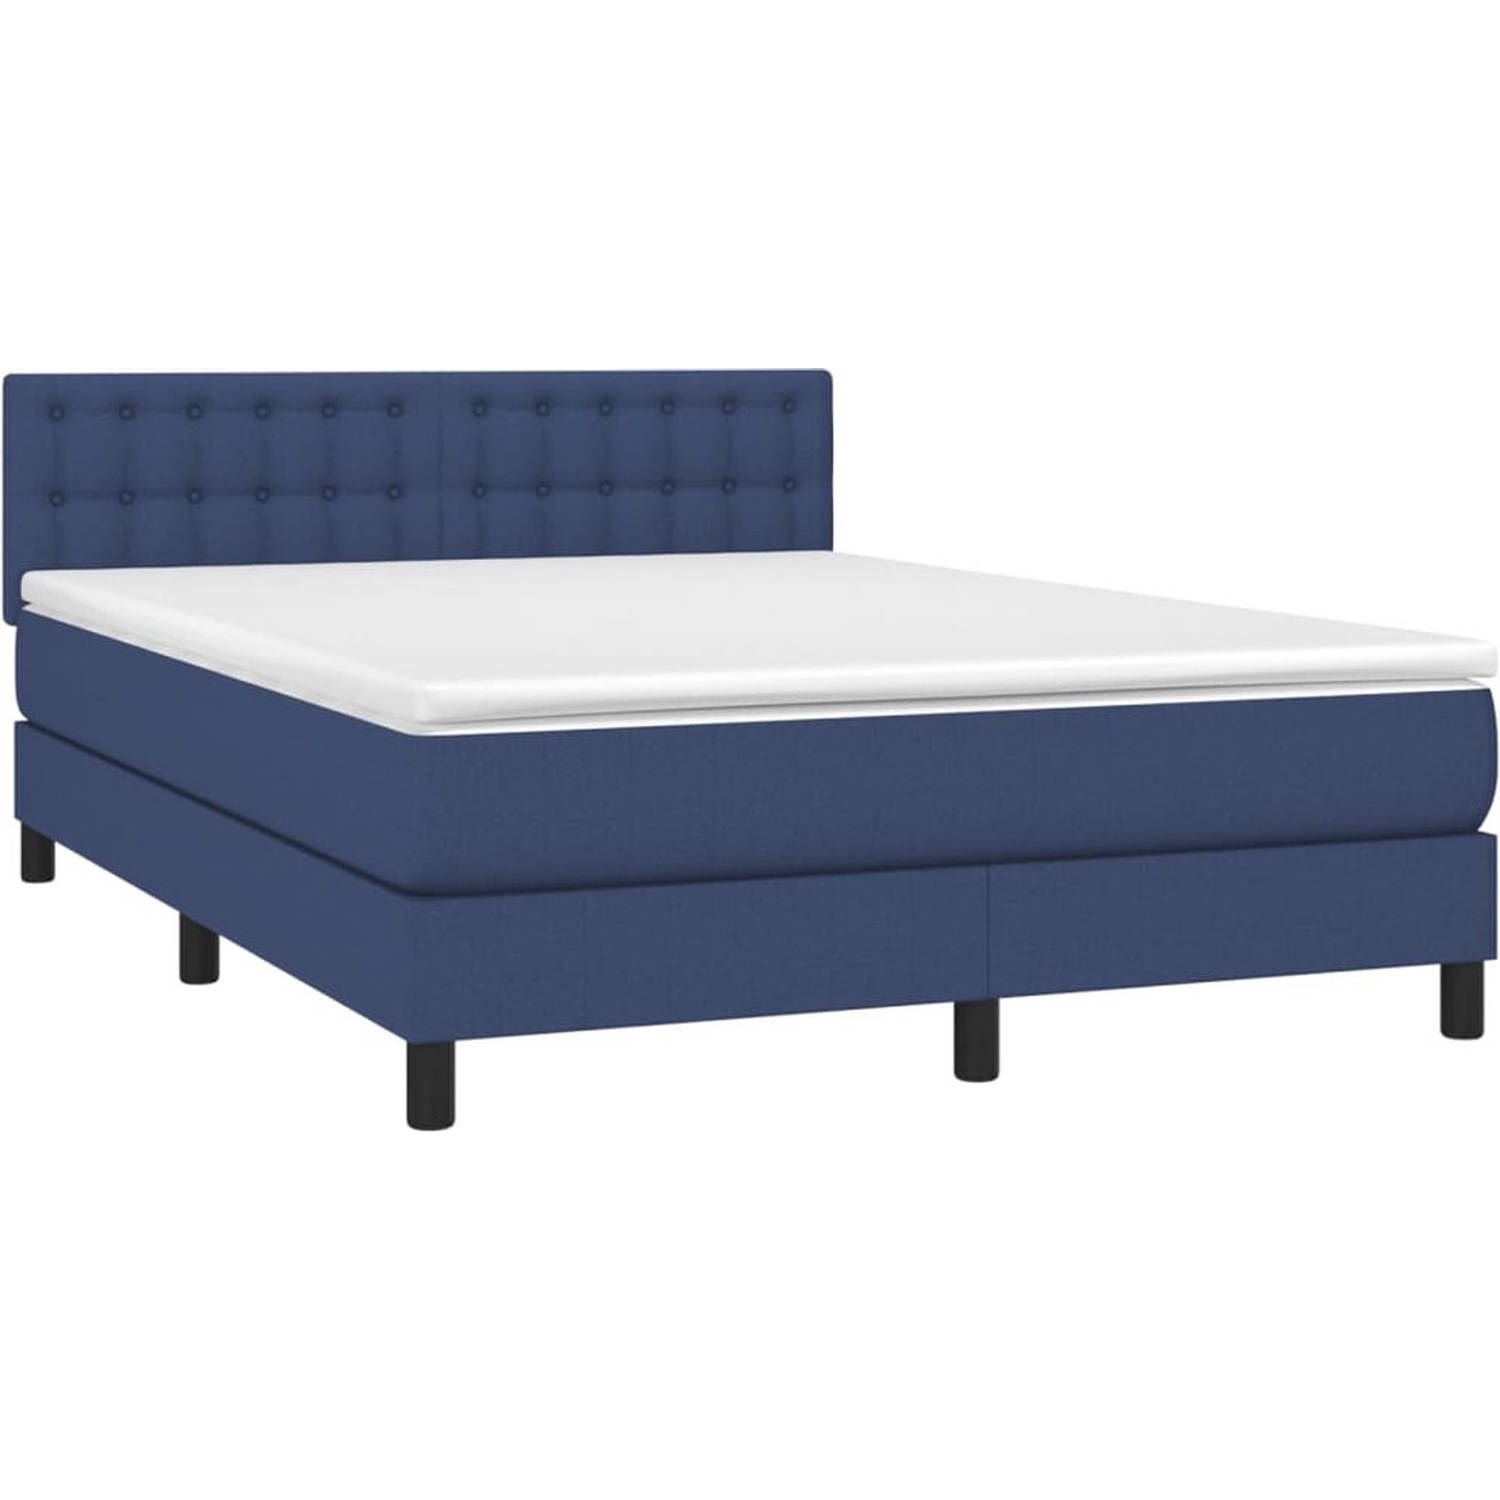 The Living Store Boxspring Bed - blauw - 140 x 190 cm - LED-verlichting